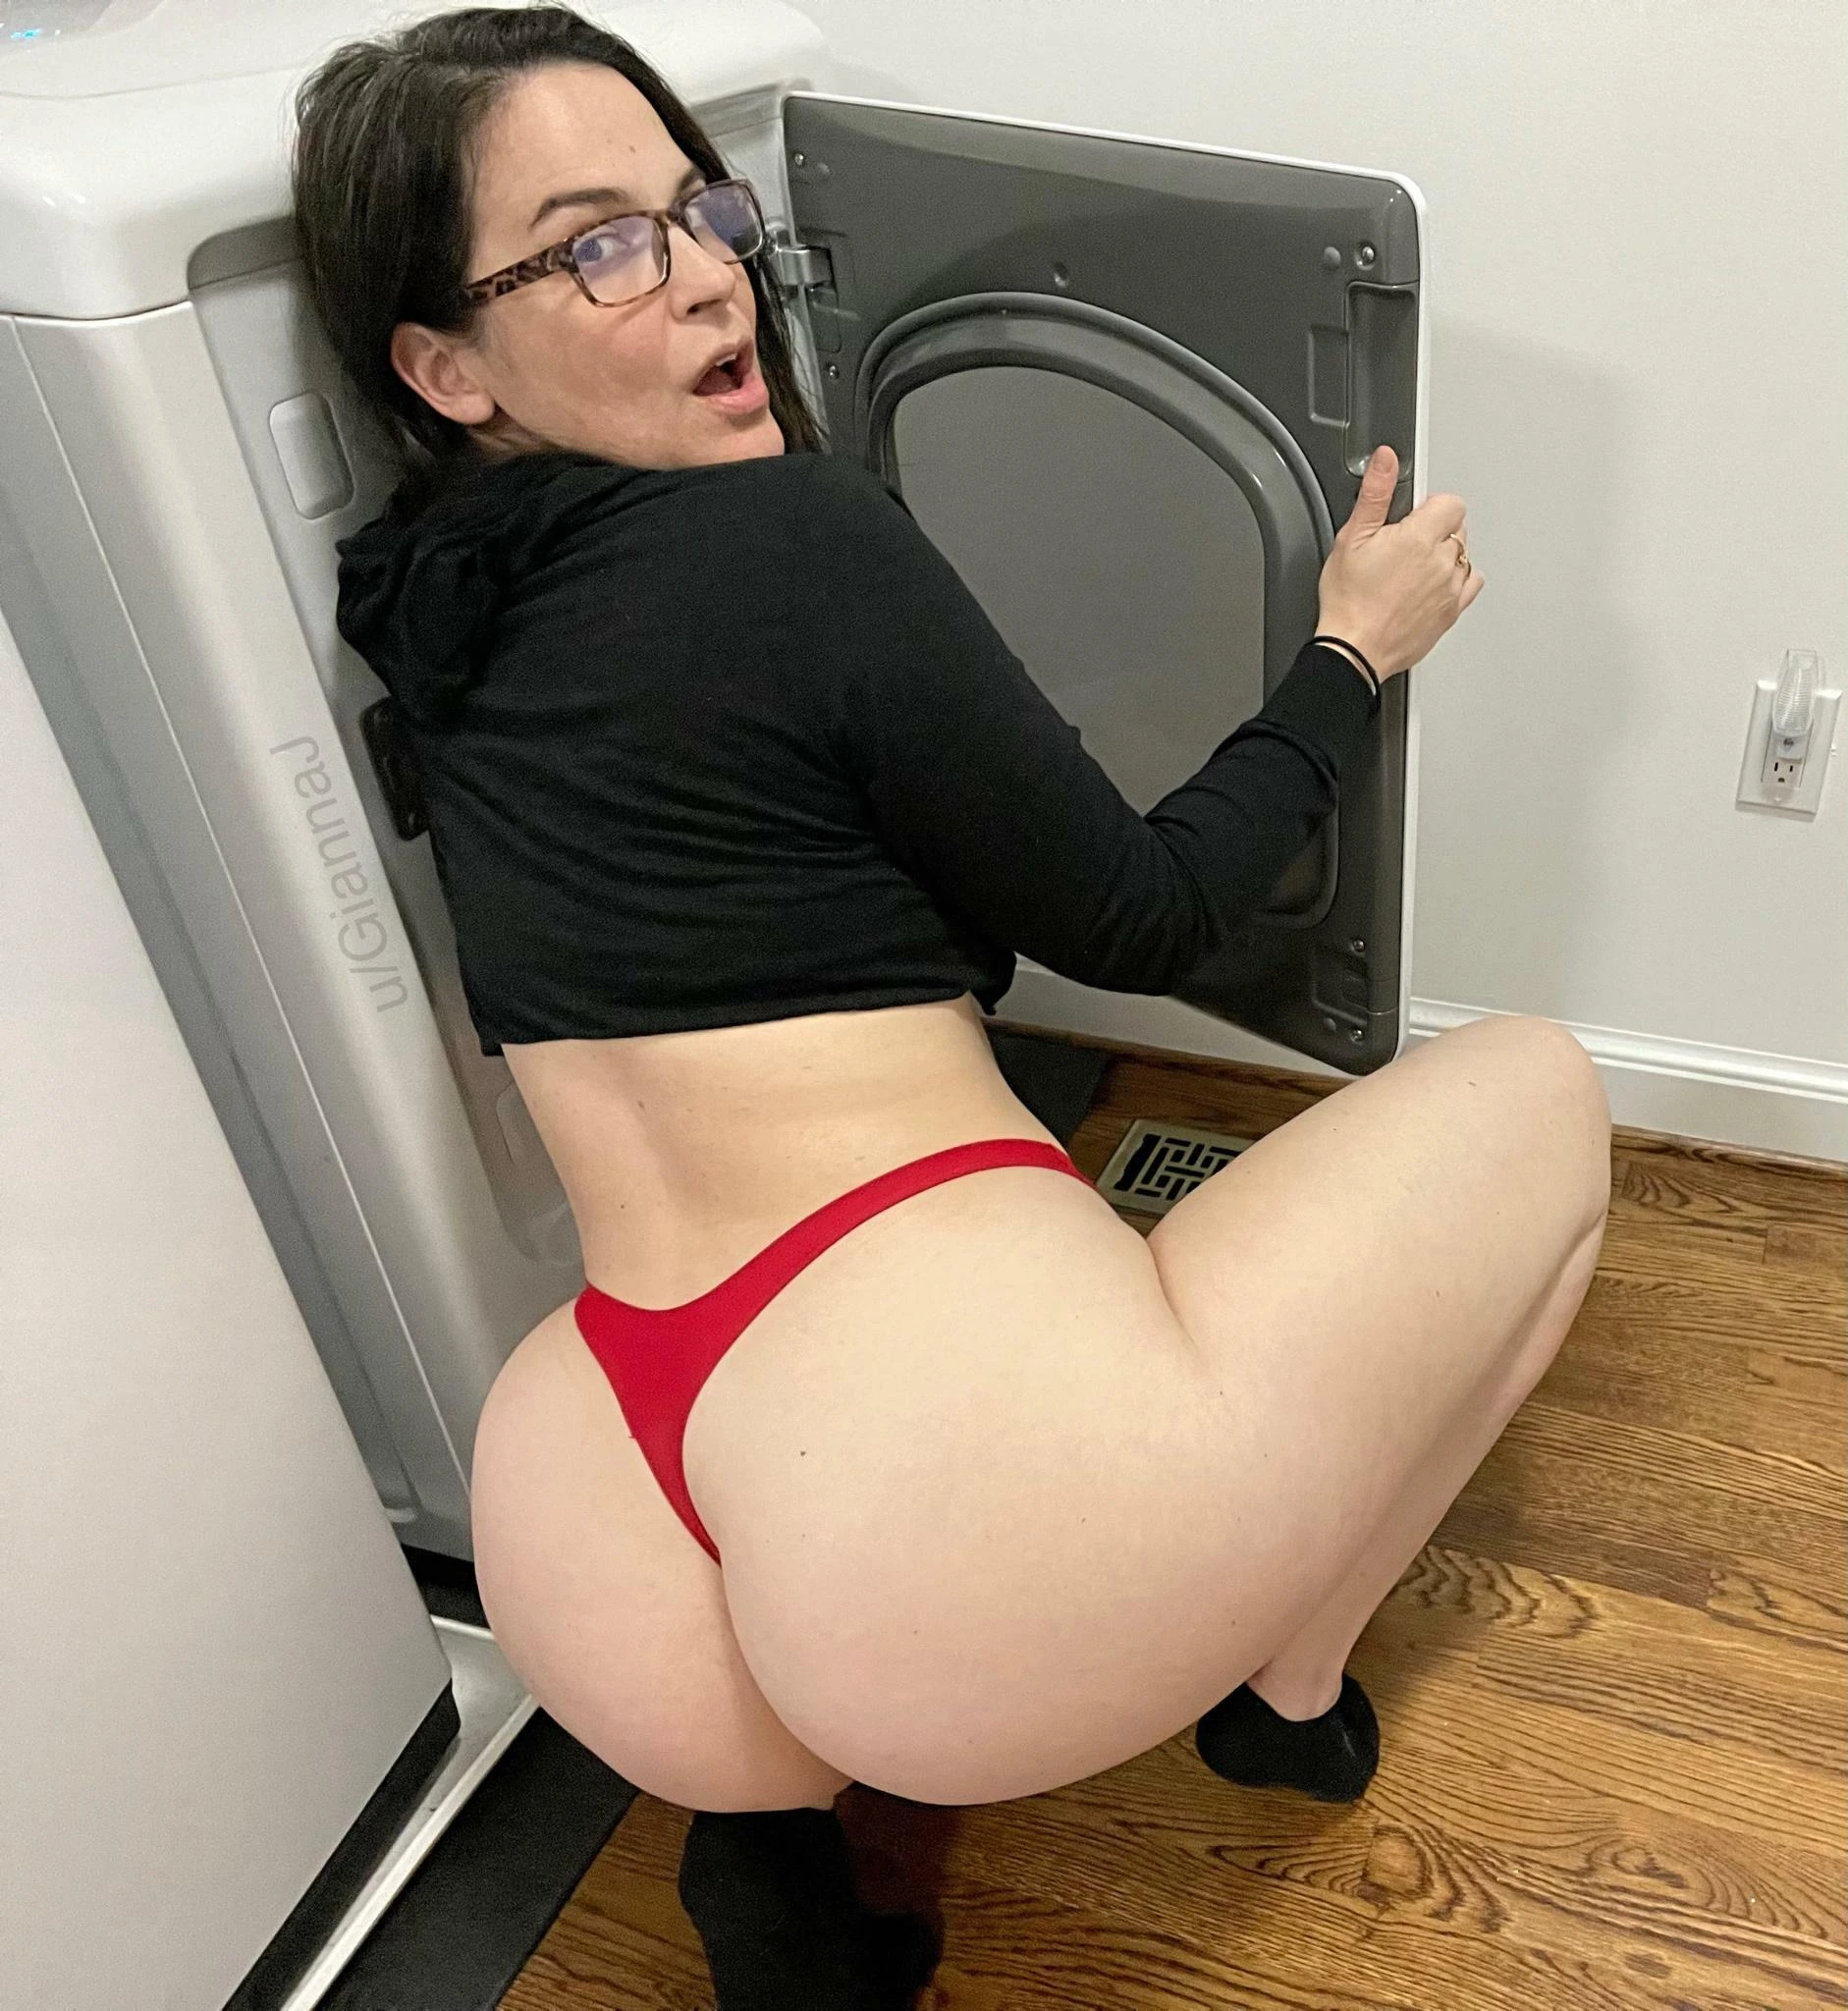 Doing laundry all day if you want to pop in and drop off a load